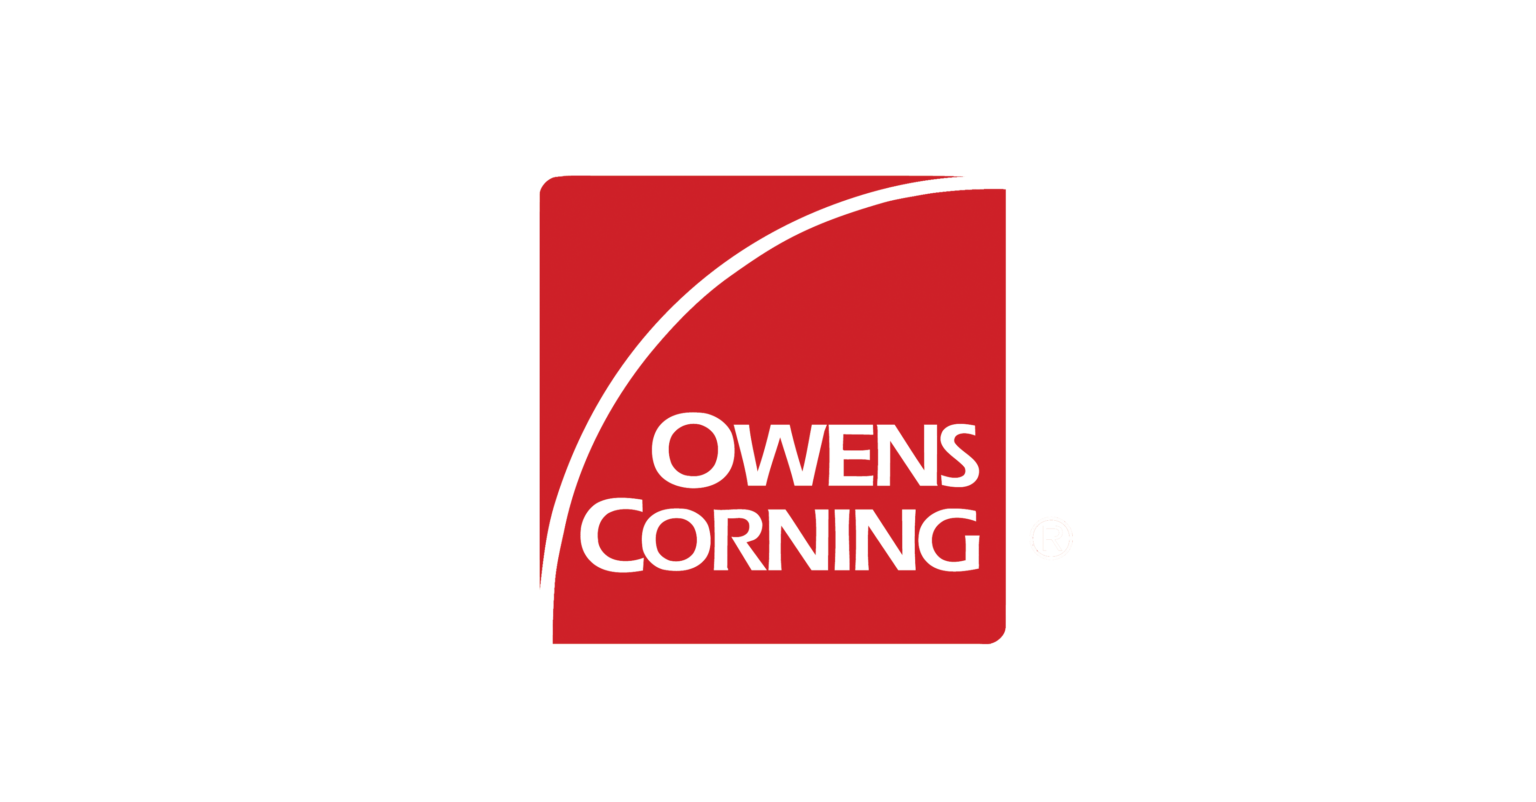 Meet our Owens Corning Rep